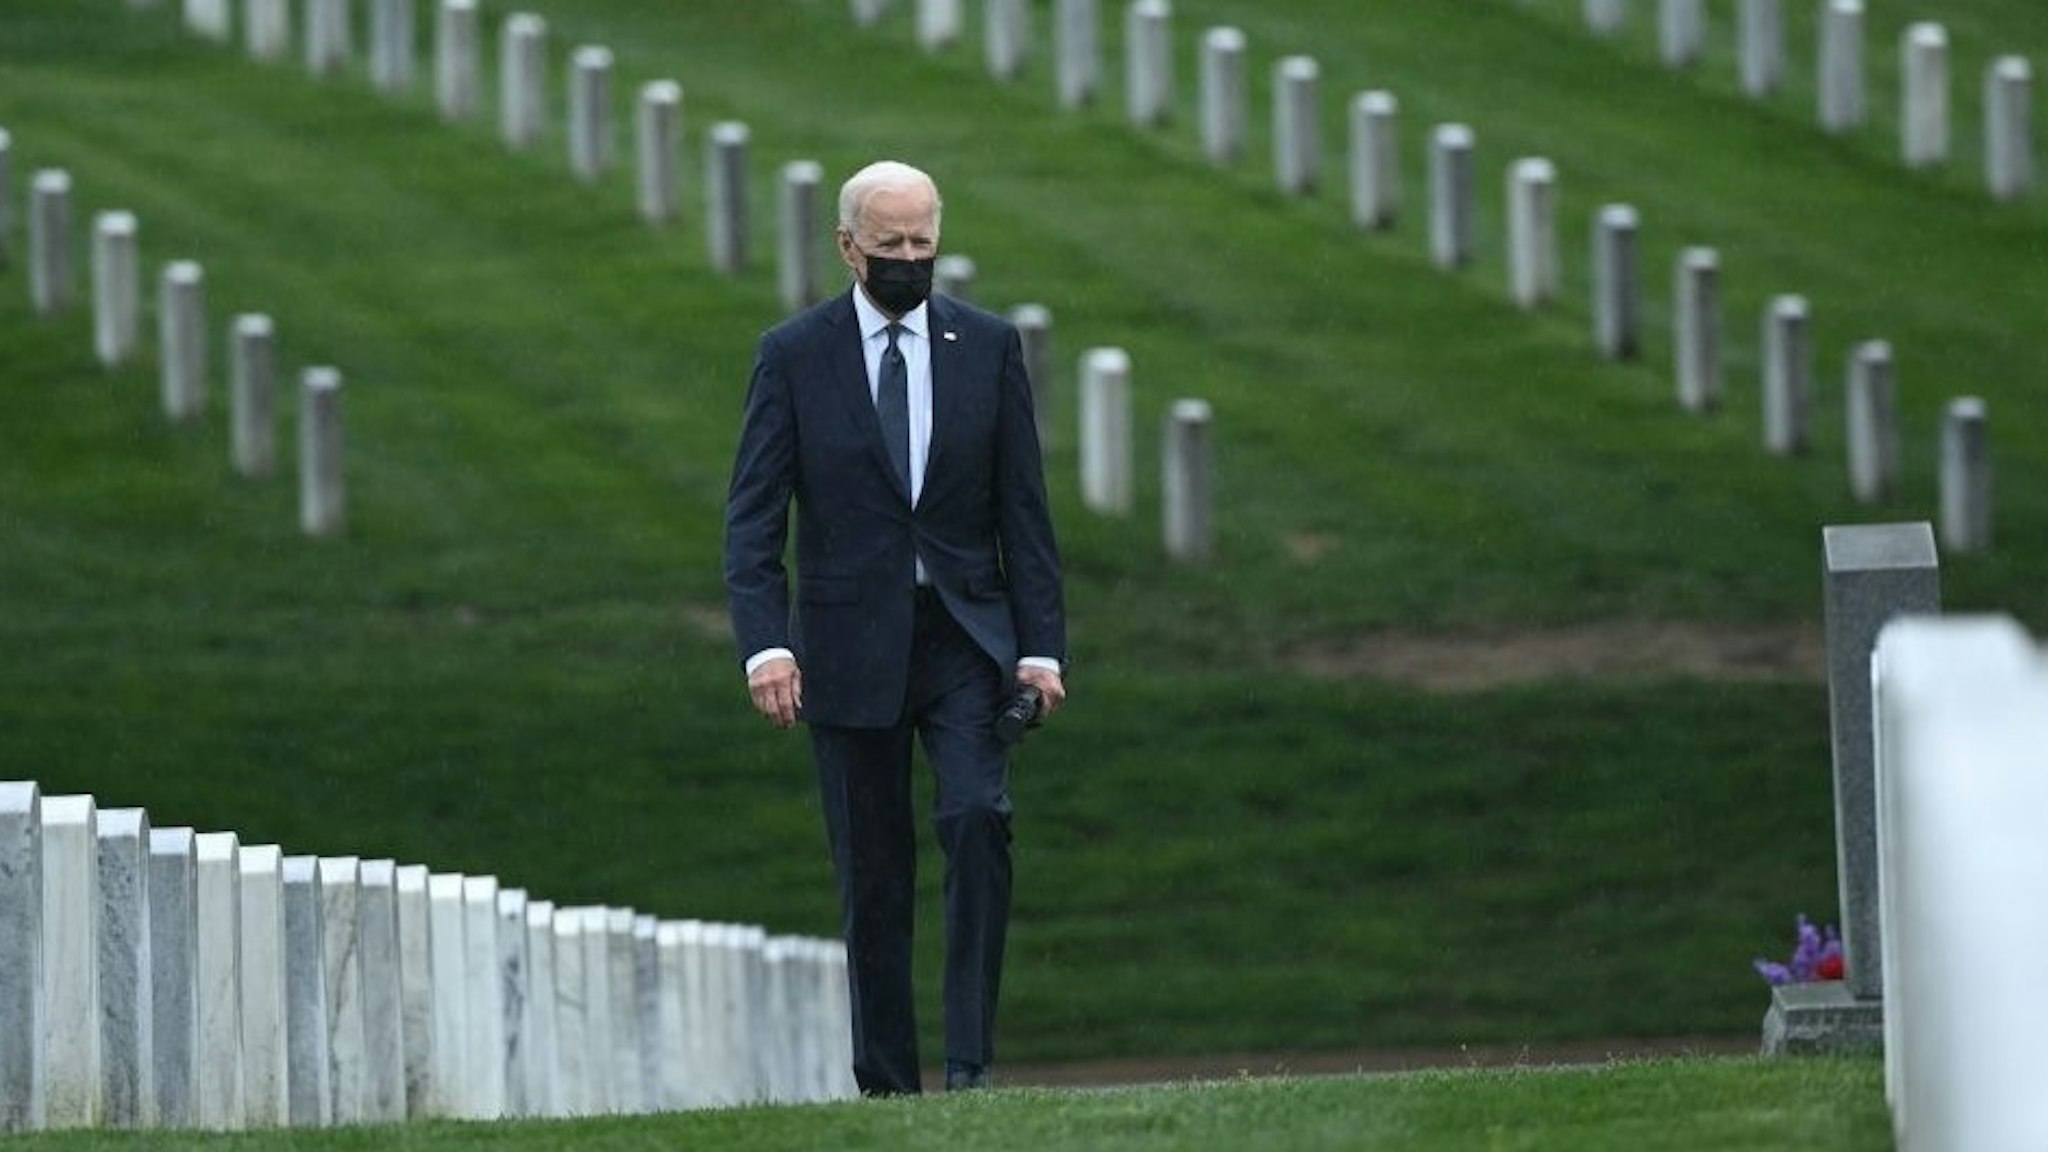 US President Joe Biden walks through Arlington National cemetary to honor fallen veterans of Afghan conflict in Arlington, Virginia on April 14, 2021. - President Joe Biden announced it's "time to end" America's longest war with the unconditional withdrawal of troops from Afghanistan, where they have spent two decades in a bloody, largely fruitless battle against the Taliban. (Photo by Brendan SMIALOWSKI / AFP) (Photo by